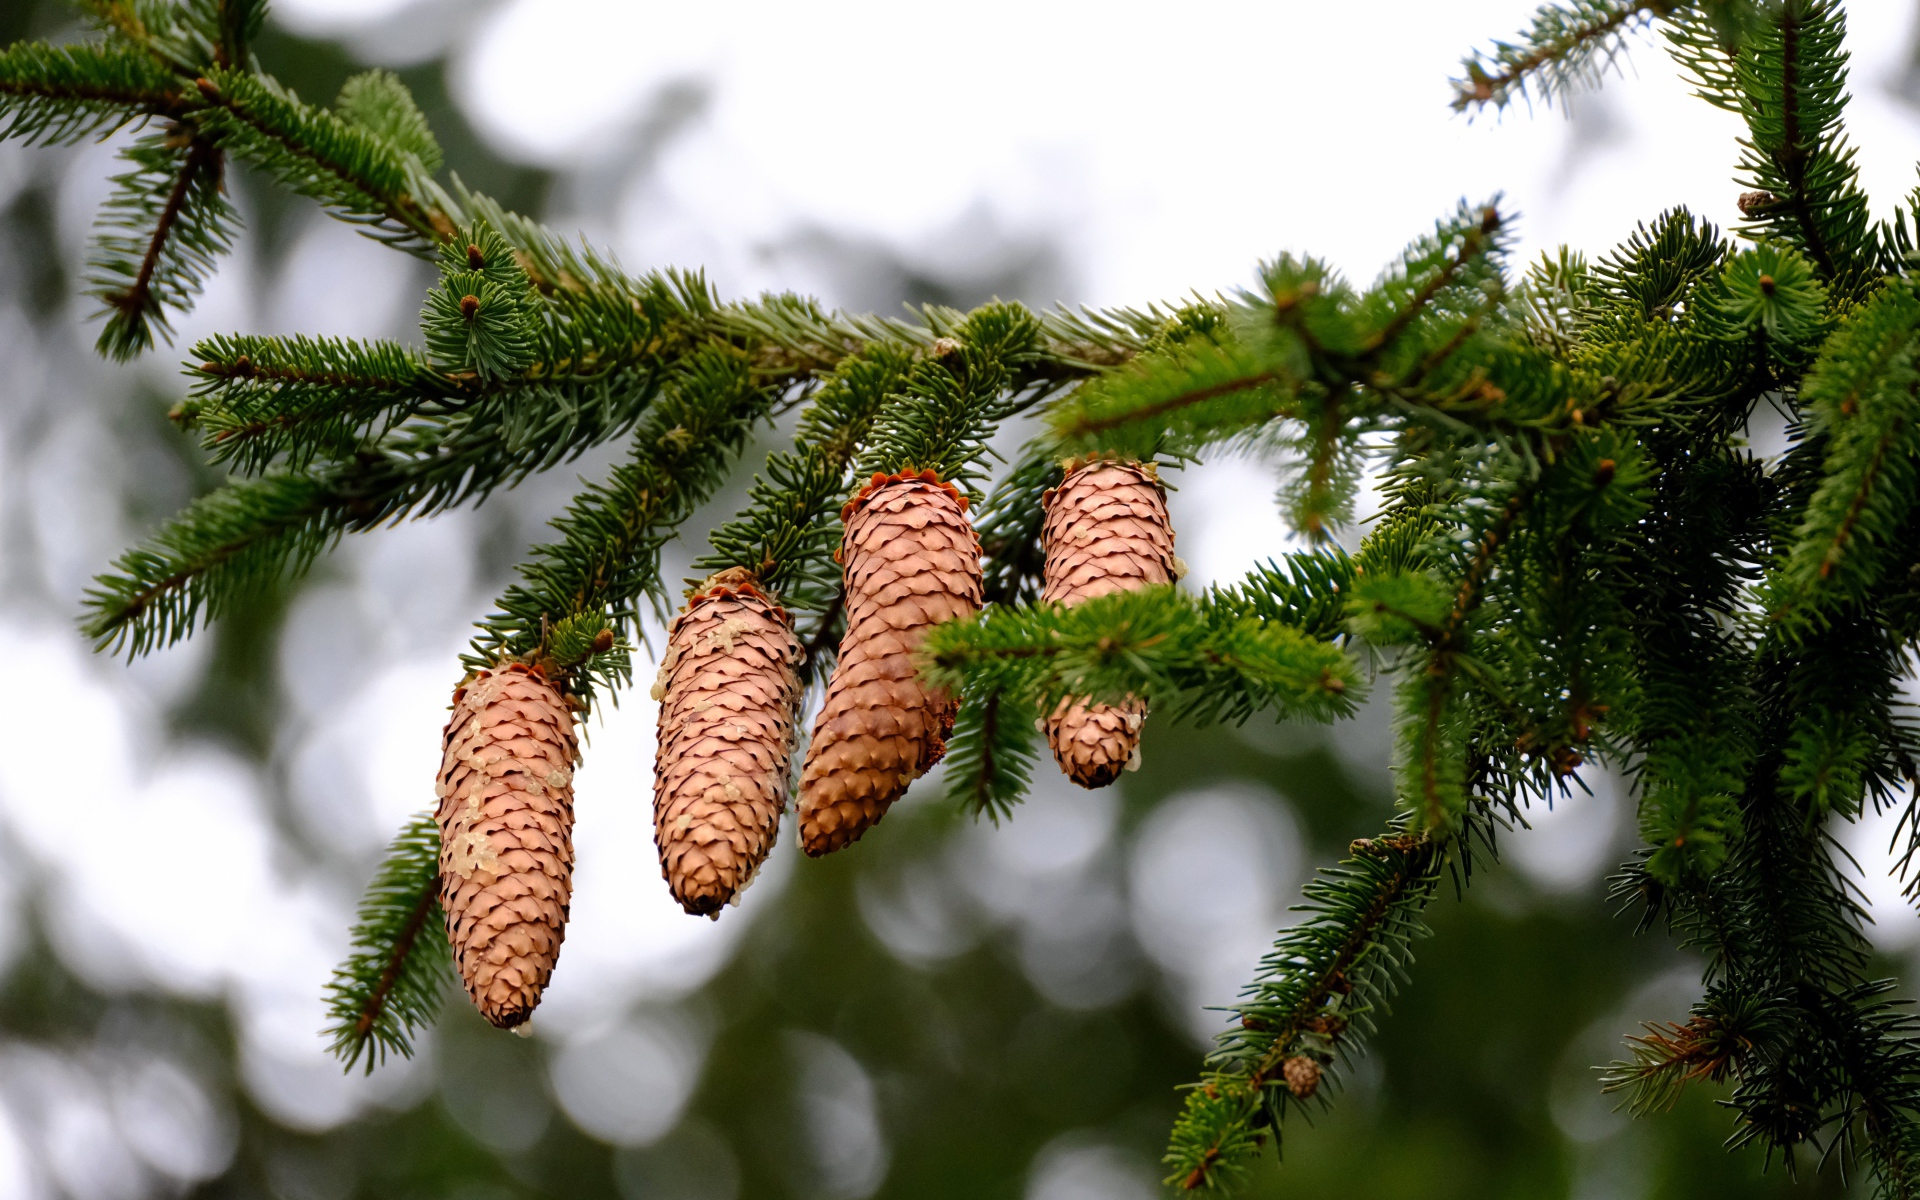 Big brown cones on a green spruce branch